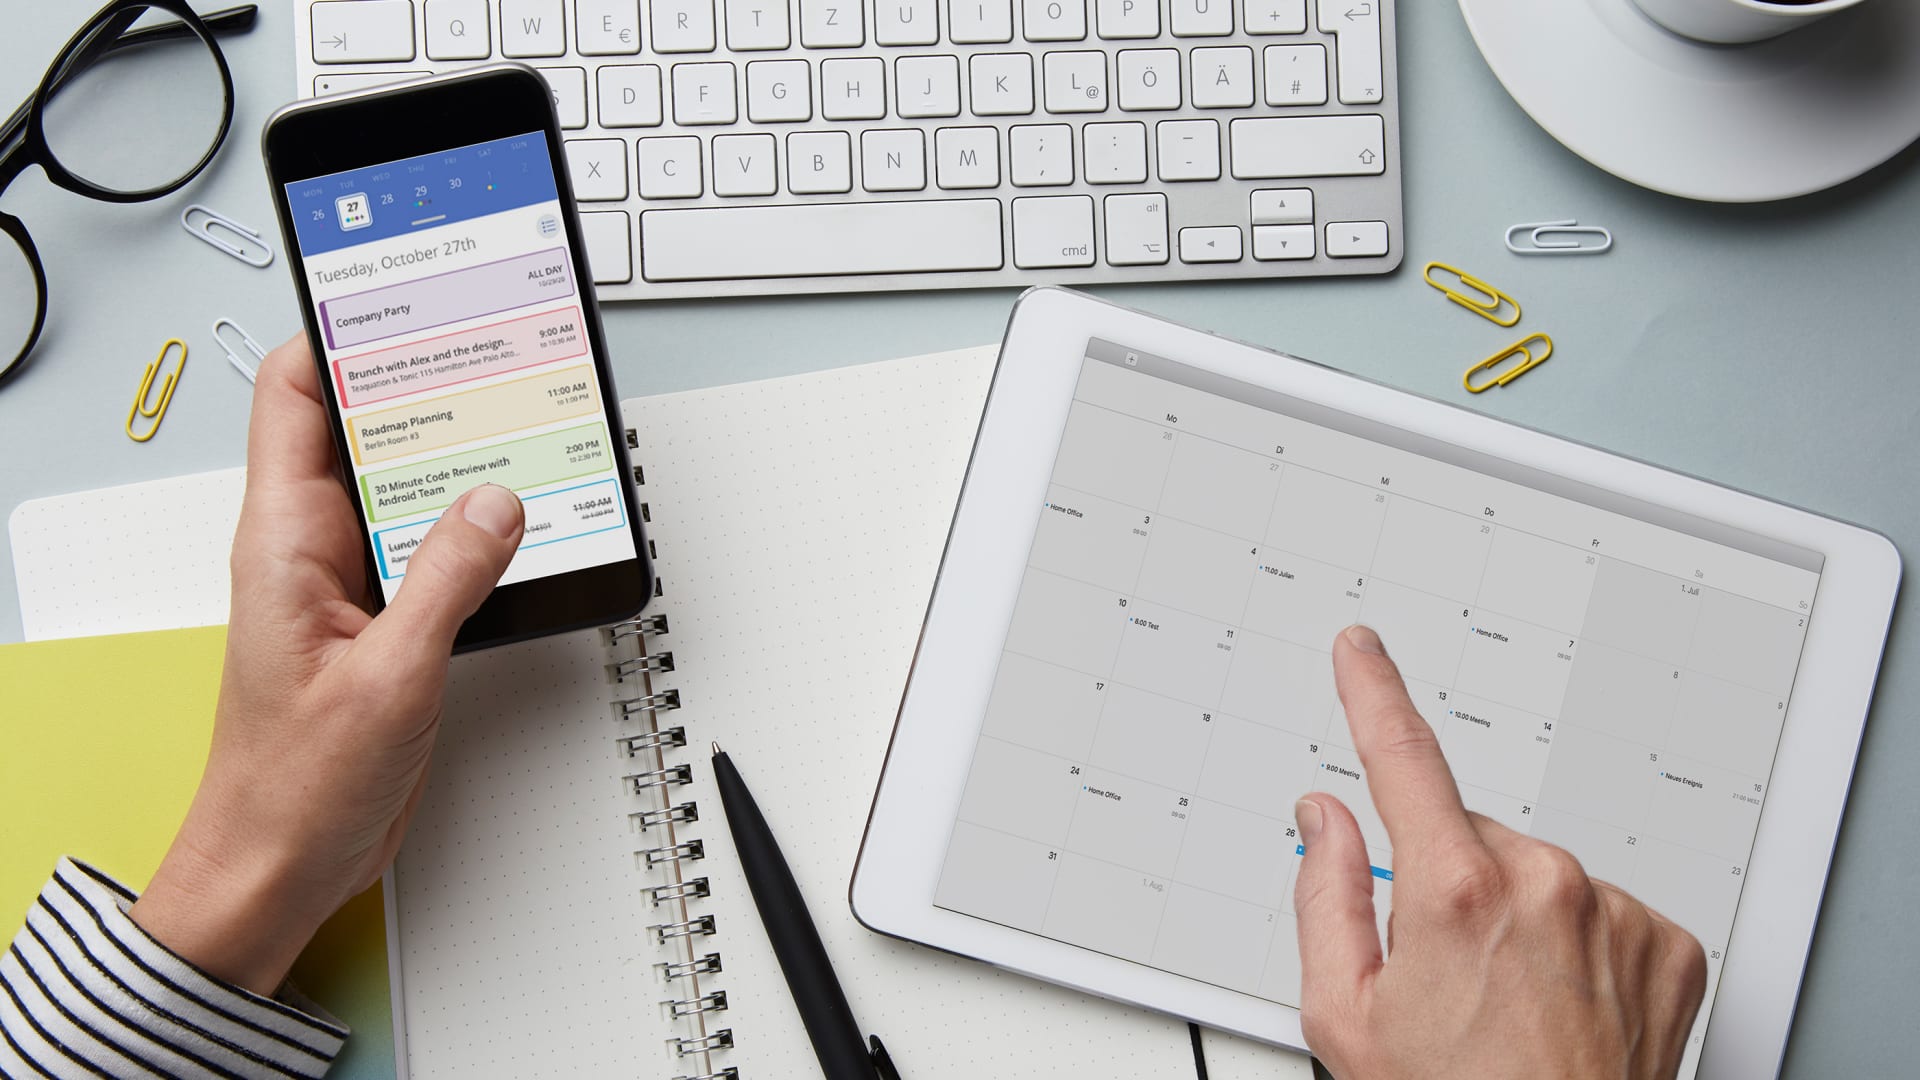 The Top 4 Productivity Tools You Haven't Heard of Yet